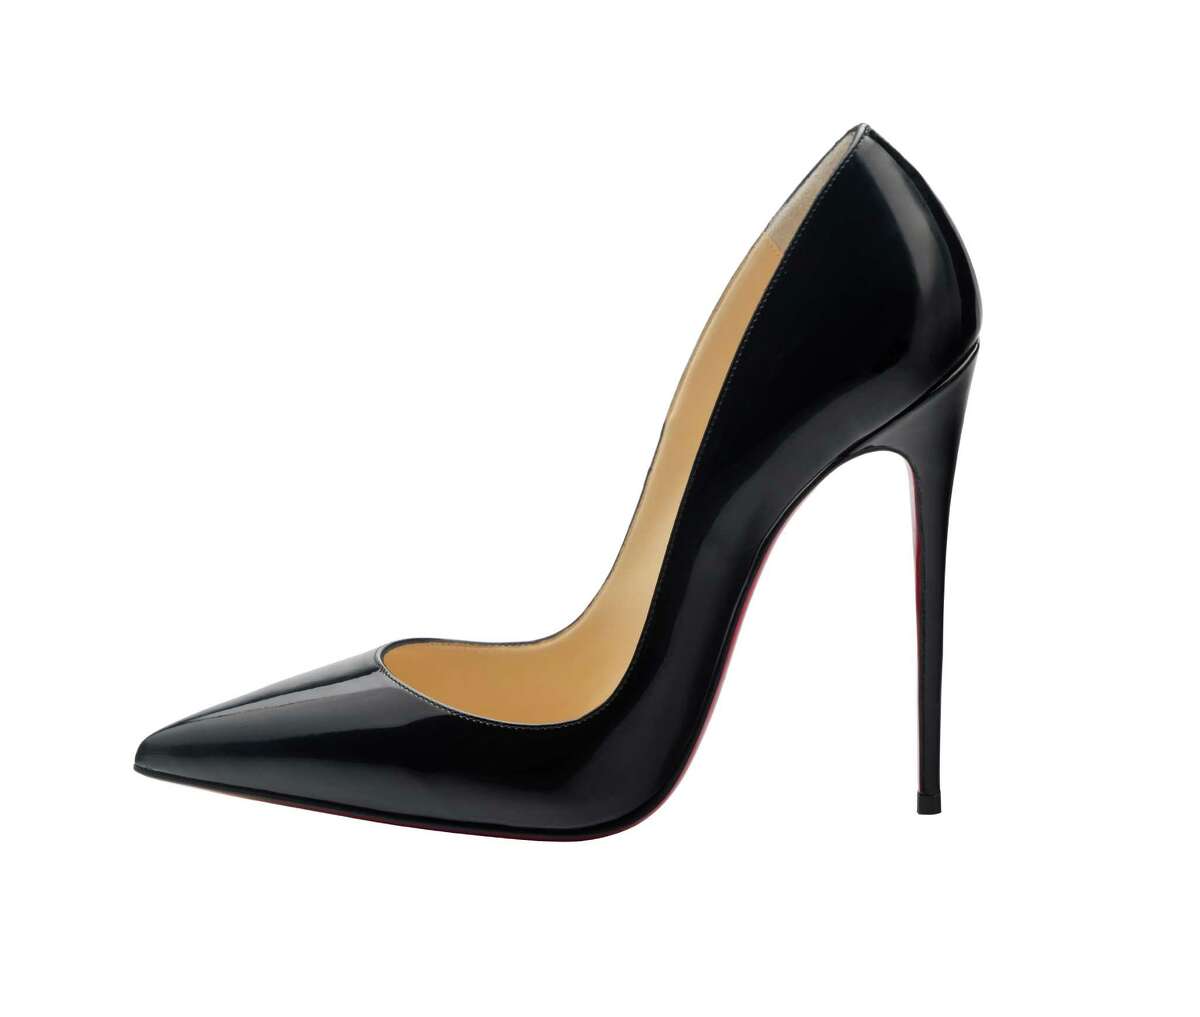 Christian Louboutin to open store at Galleria in 2016